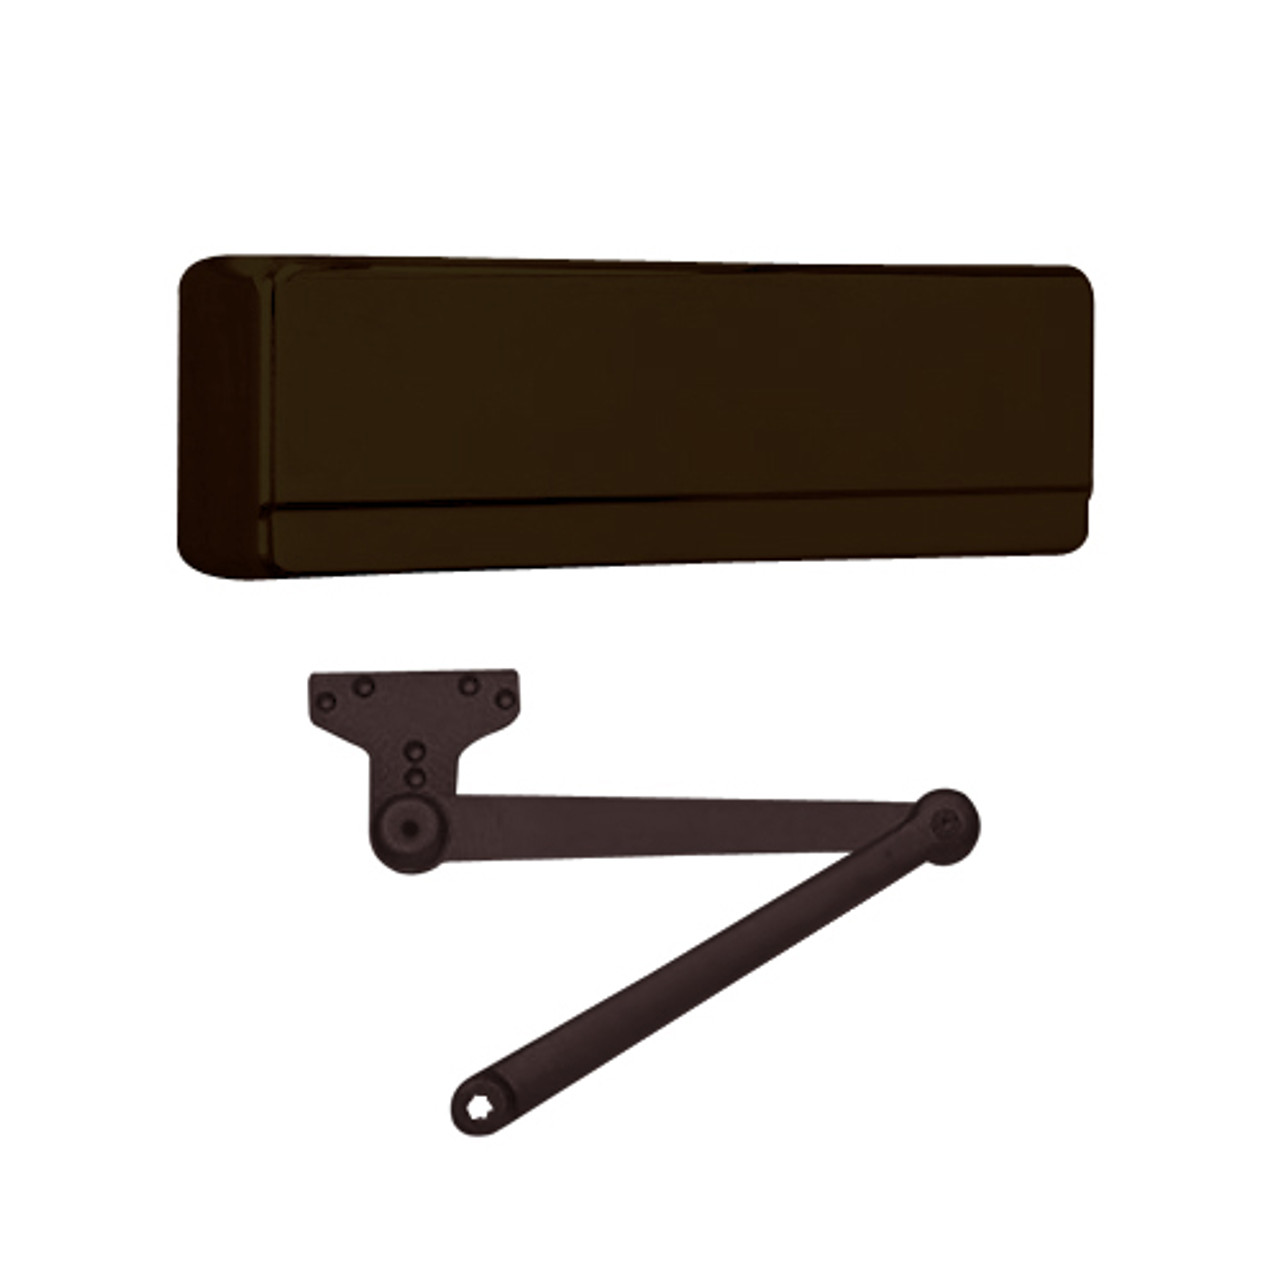 281-P10-10BE Sargent 281 Series Powerglide Cast Iron Door Closer with Heavy Duty Parallel Arm in Dark Oxidized Satin Bronze